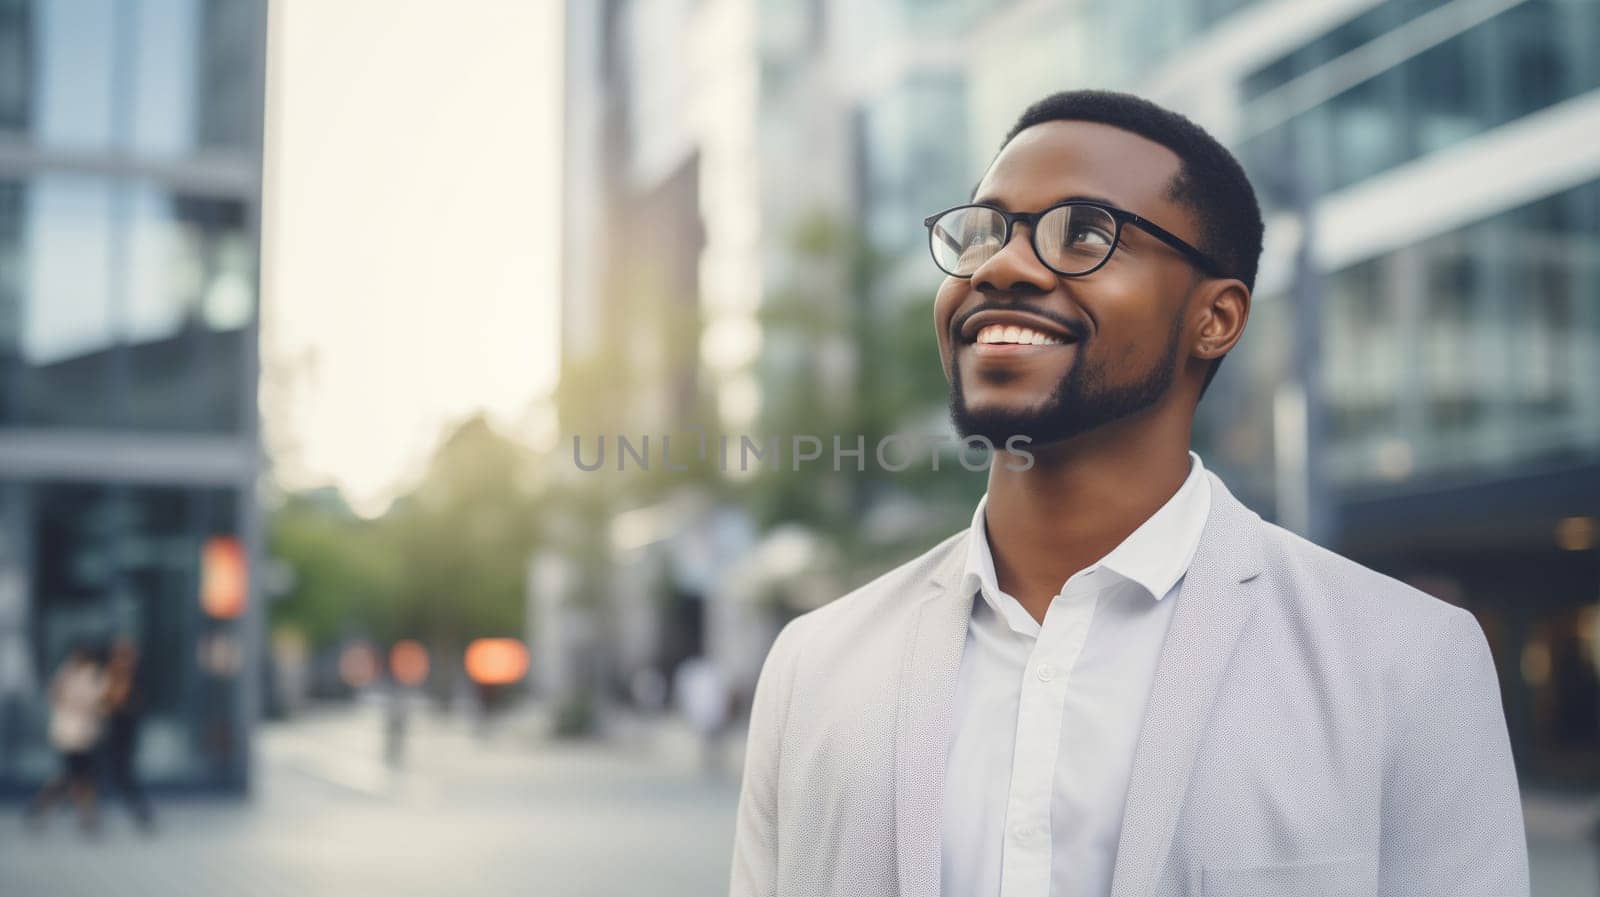 Confident happy smiling black entrepreneur standing in the city, wearing glasses, white business suit, looking away